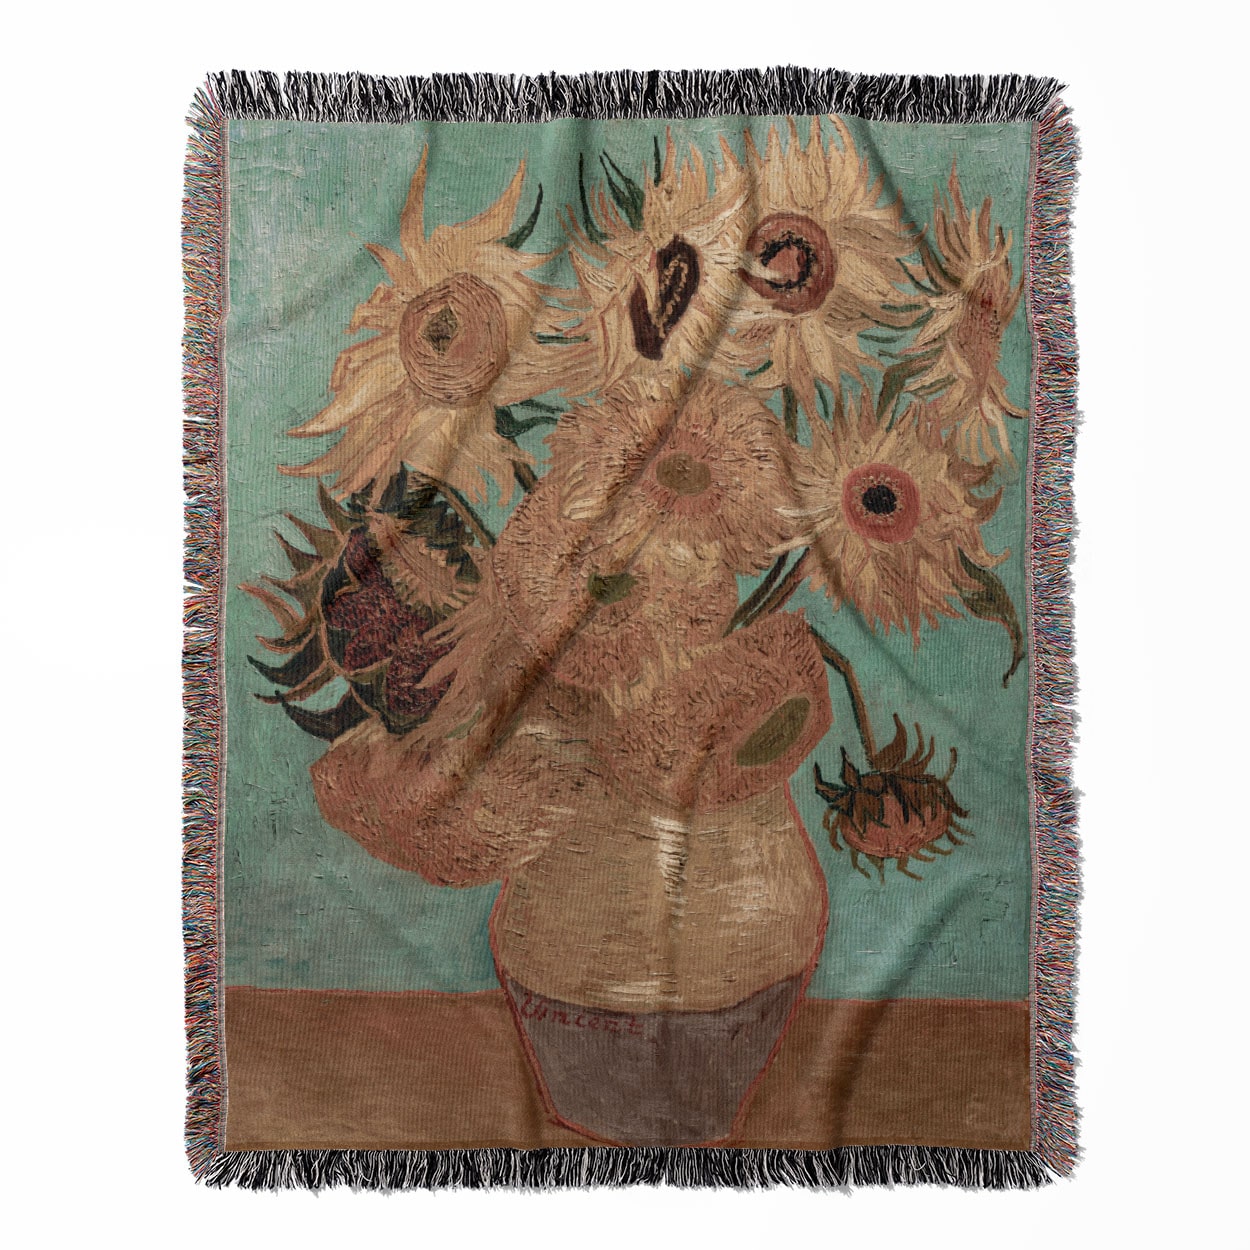 Van Gogh Sunflowers woven throw blanket, made of 100% cotton, featuring a soft and cozy texture with a painting design for home decor.